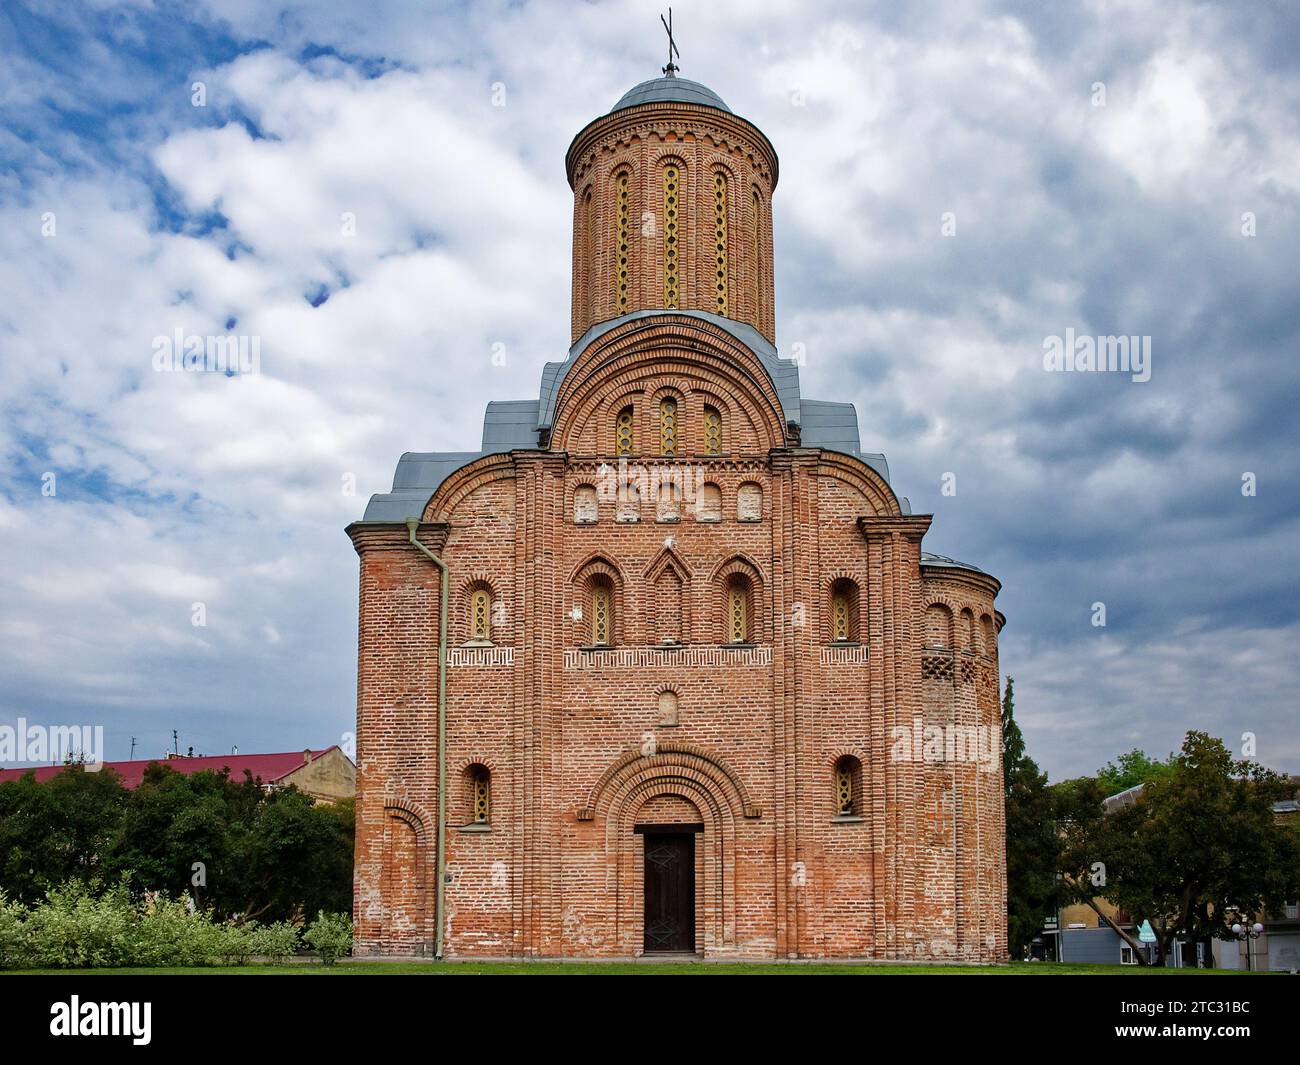 The Pyatnitskaya Church in Chernigov, Ukraine, a striking red brick building with a towering spire, is set against a picturesque backdrop of lush gree Stock Photo